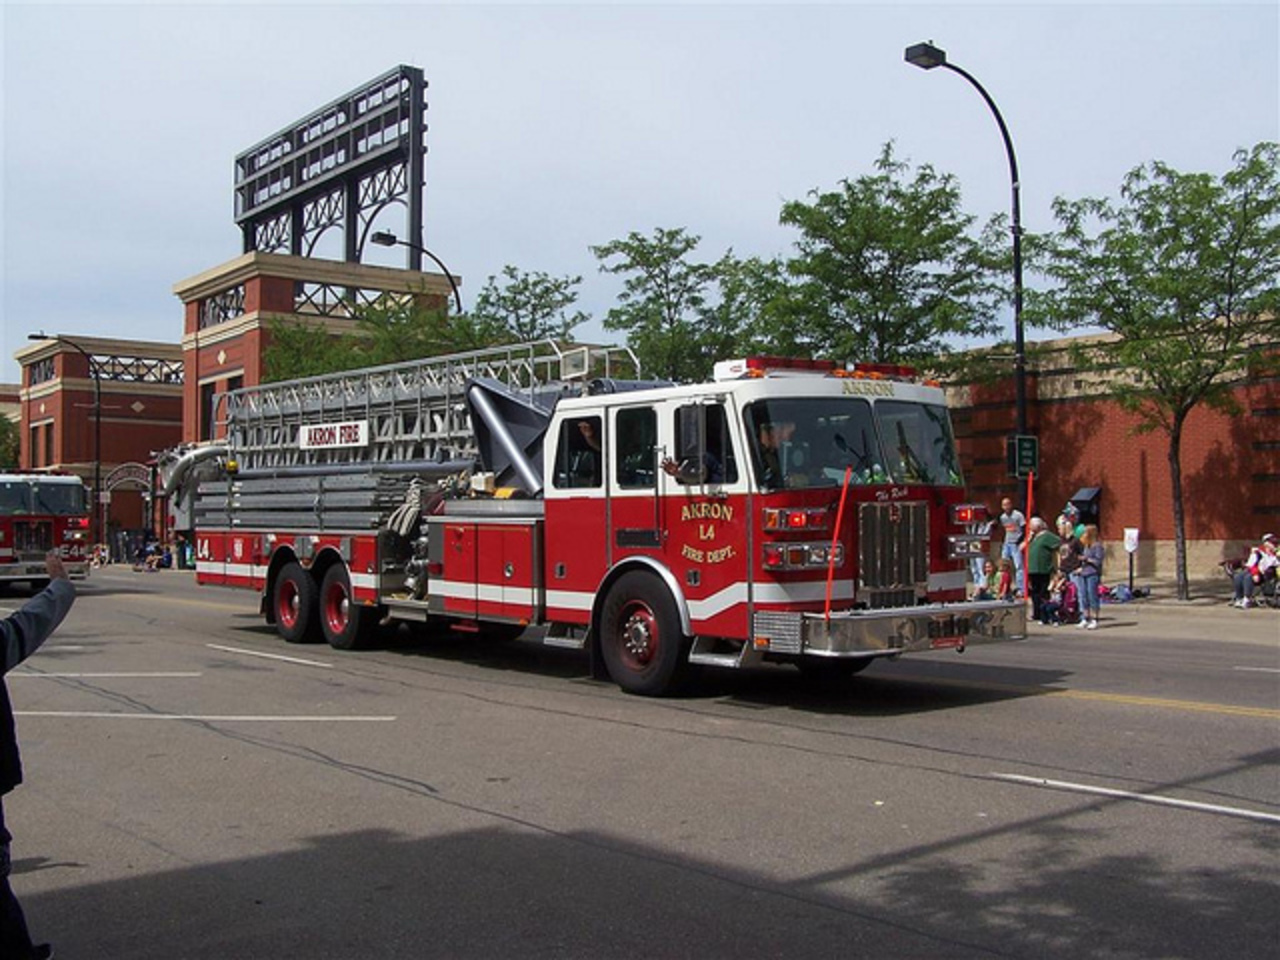 Flickr: The Mid-mount and Tiller Fire Trucks Pool